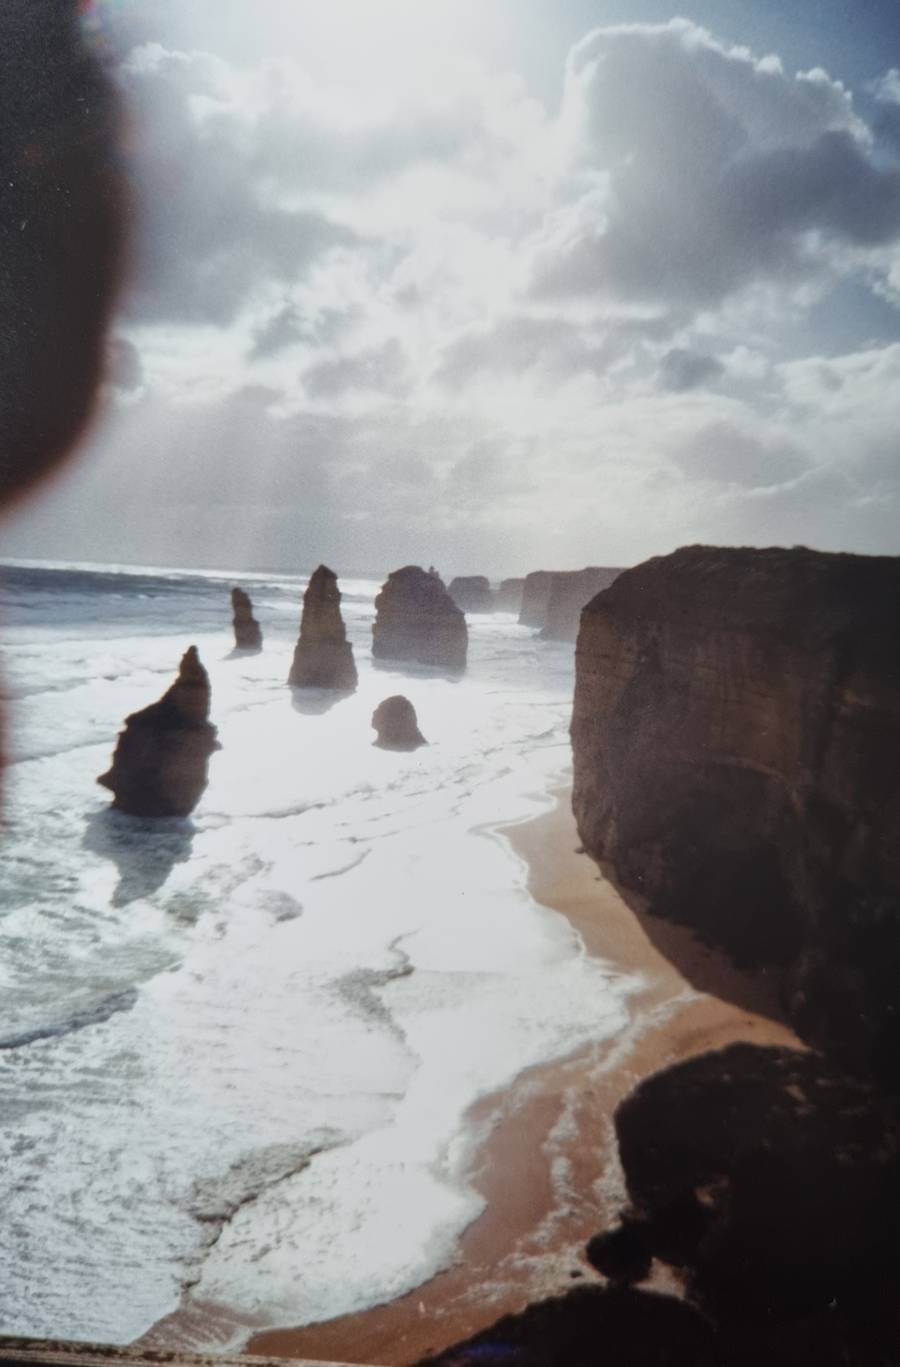 The 12 Apostles, I believe the closest one pictured has now fallen. The sun poked through at just the right time for a photo but I think I had my finger too near the lens trying to hang onto the camera in all the wind.